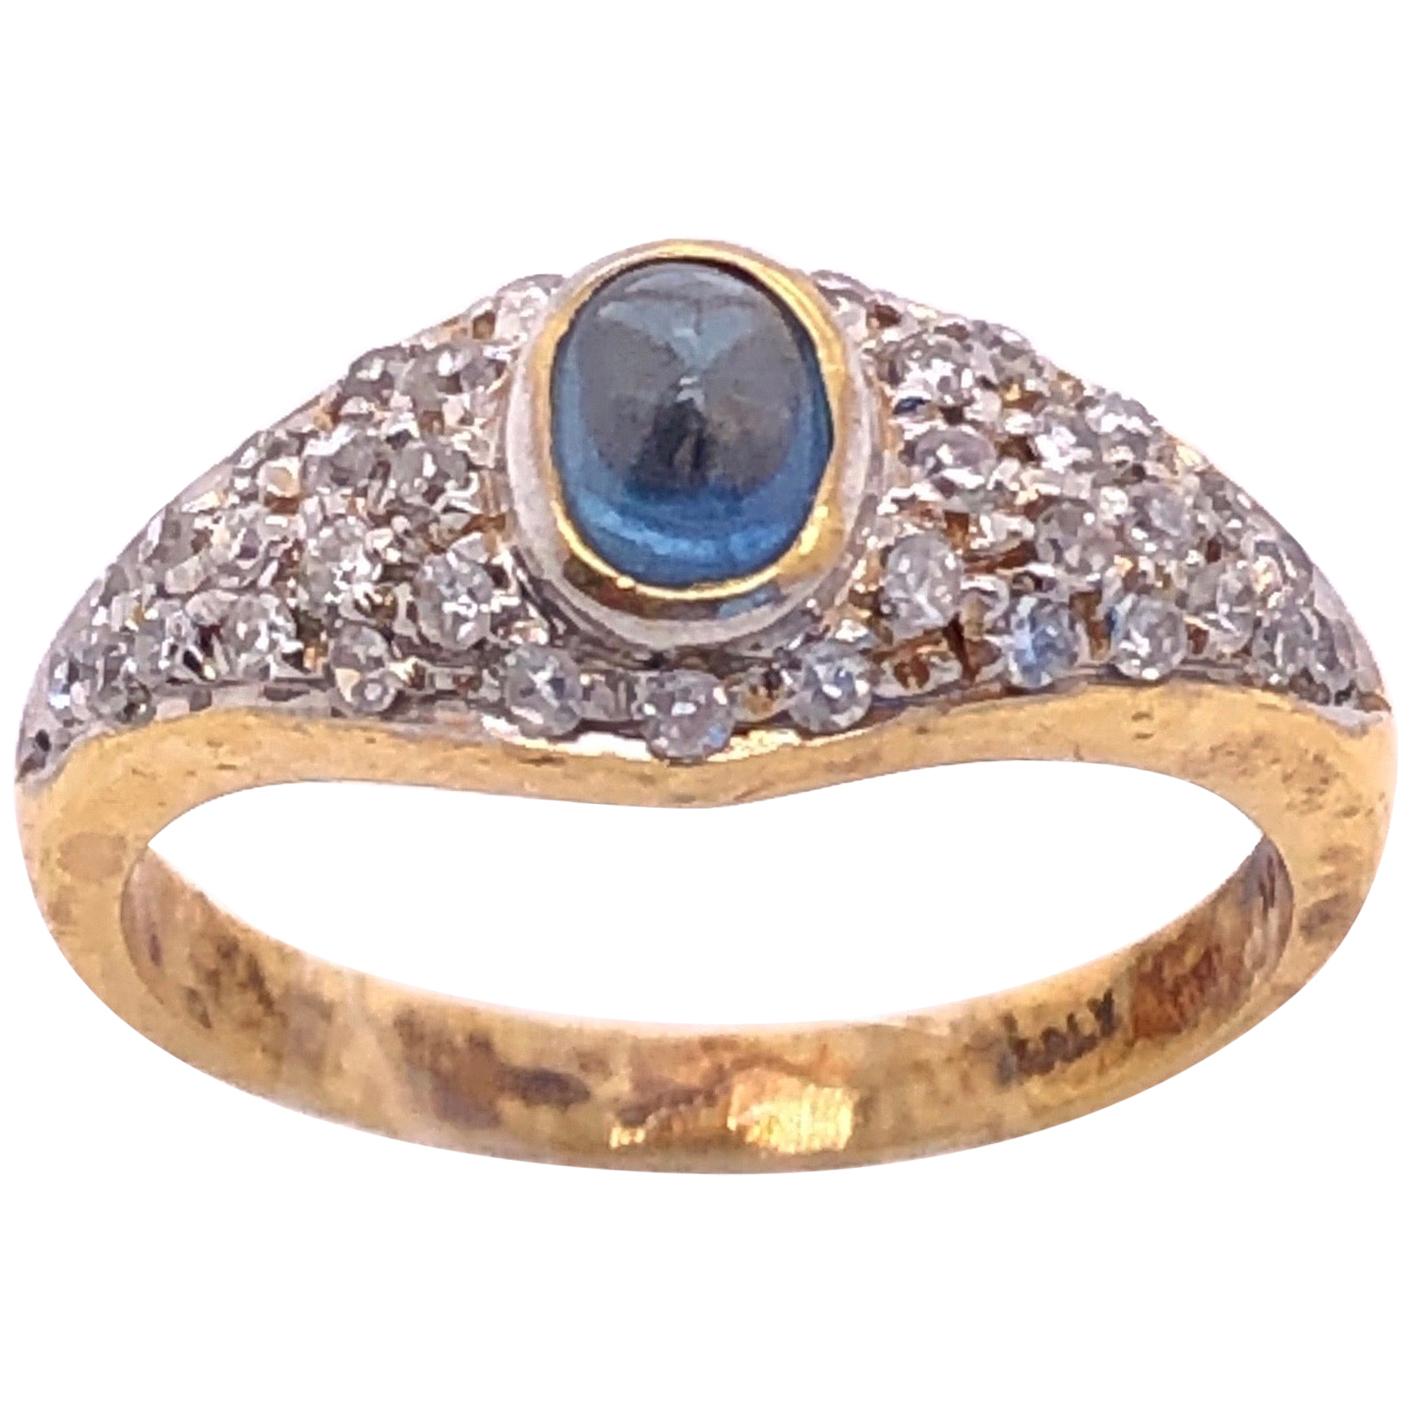 18 Karat Yellow and White Gold Ring Sapphire Cabochon and Encrusted Diamonds